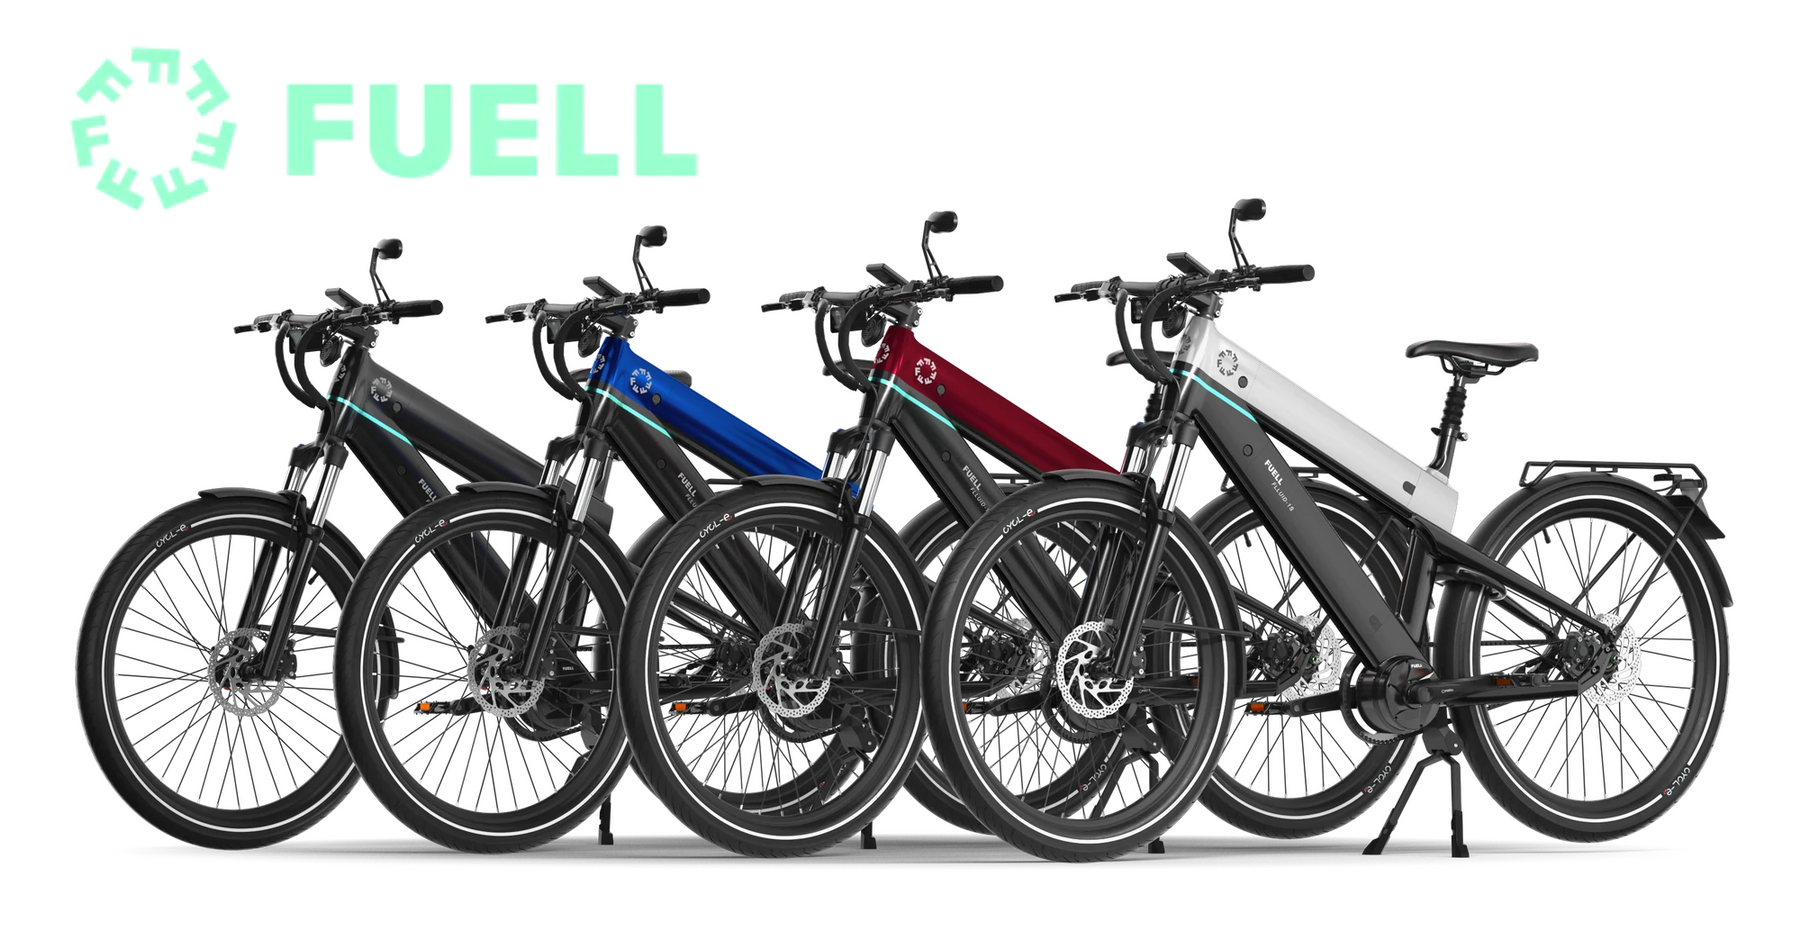 FUELL FLLUID-1E An electric bicycle with a motorcycle pedigree